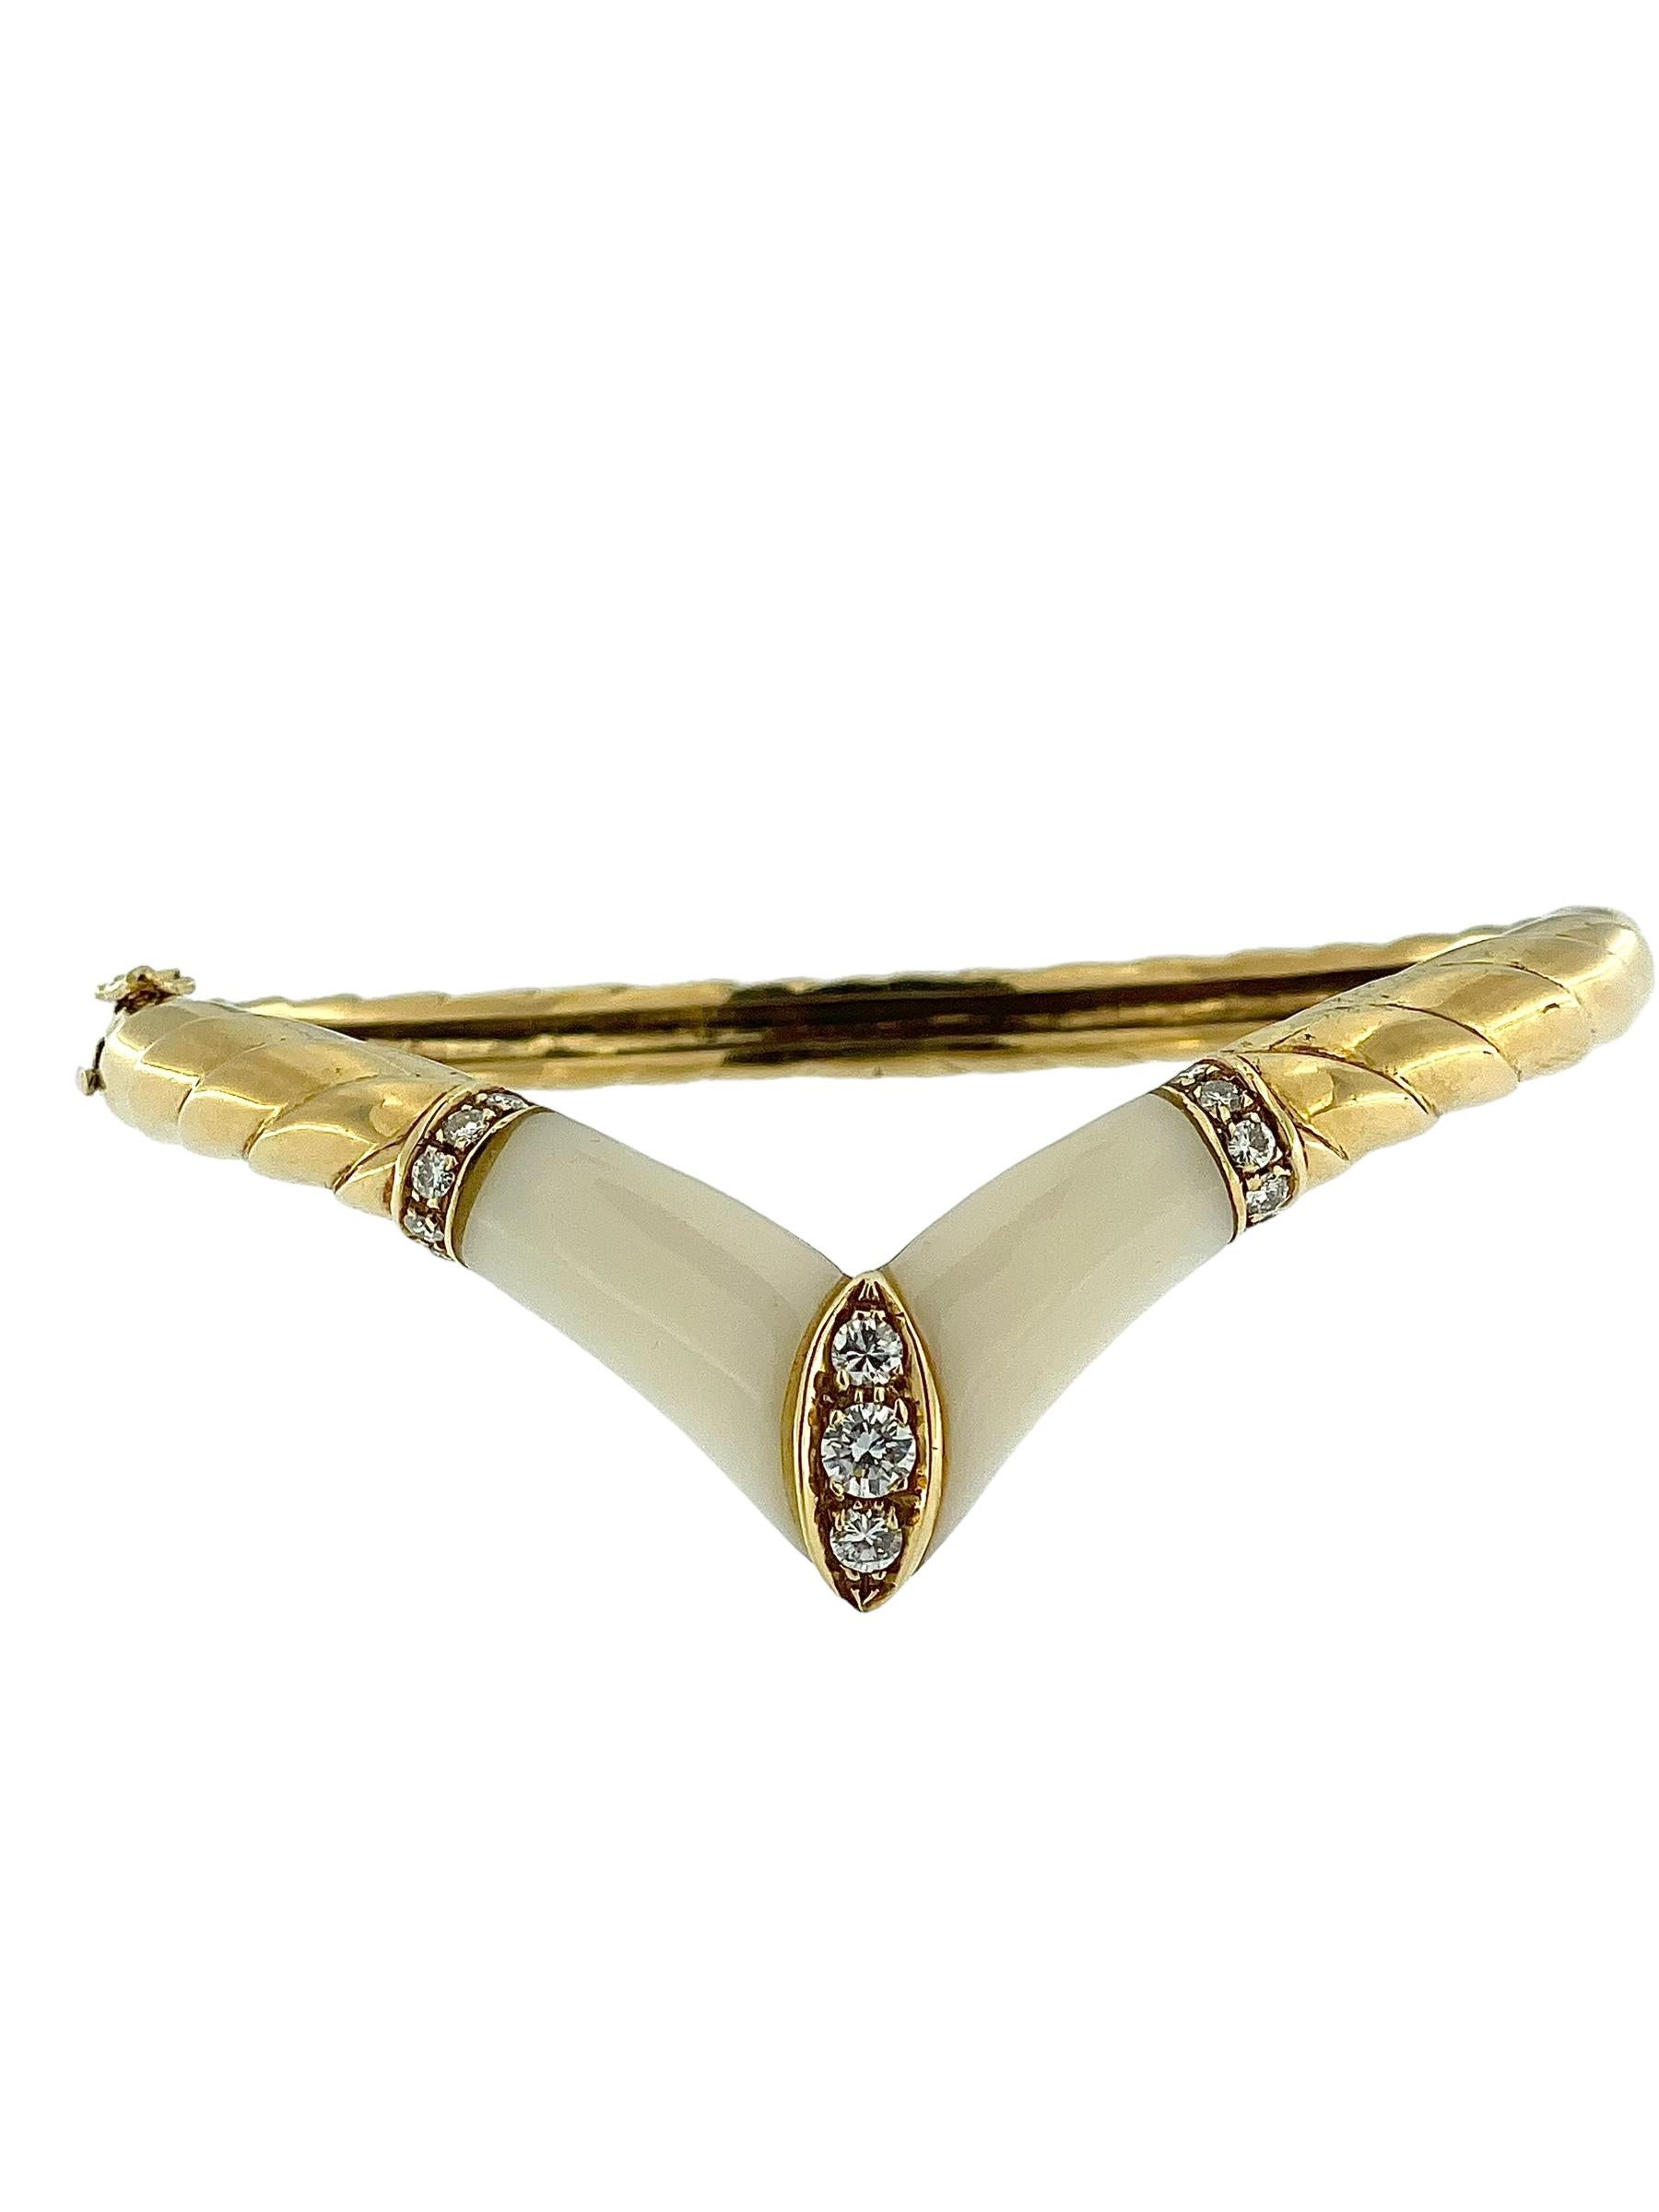 HRD Certified Gold Set Bracelet and Ring with Diamonds and Ivory For Sale 5